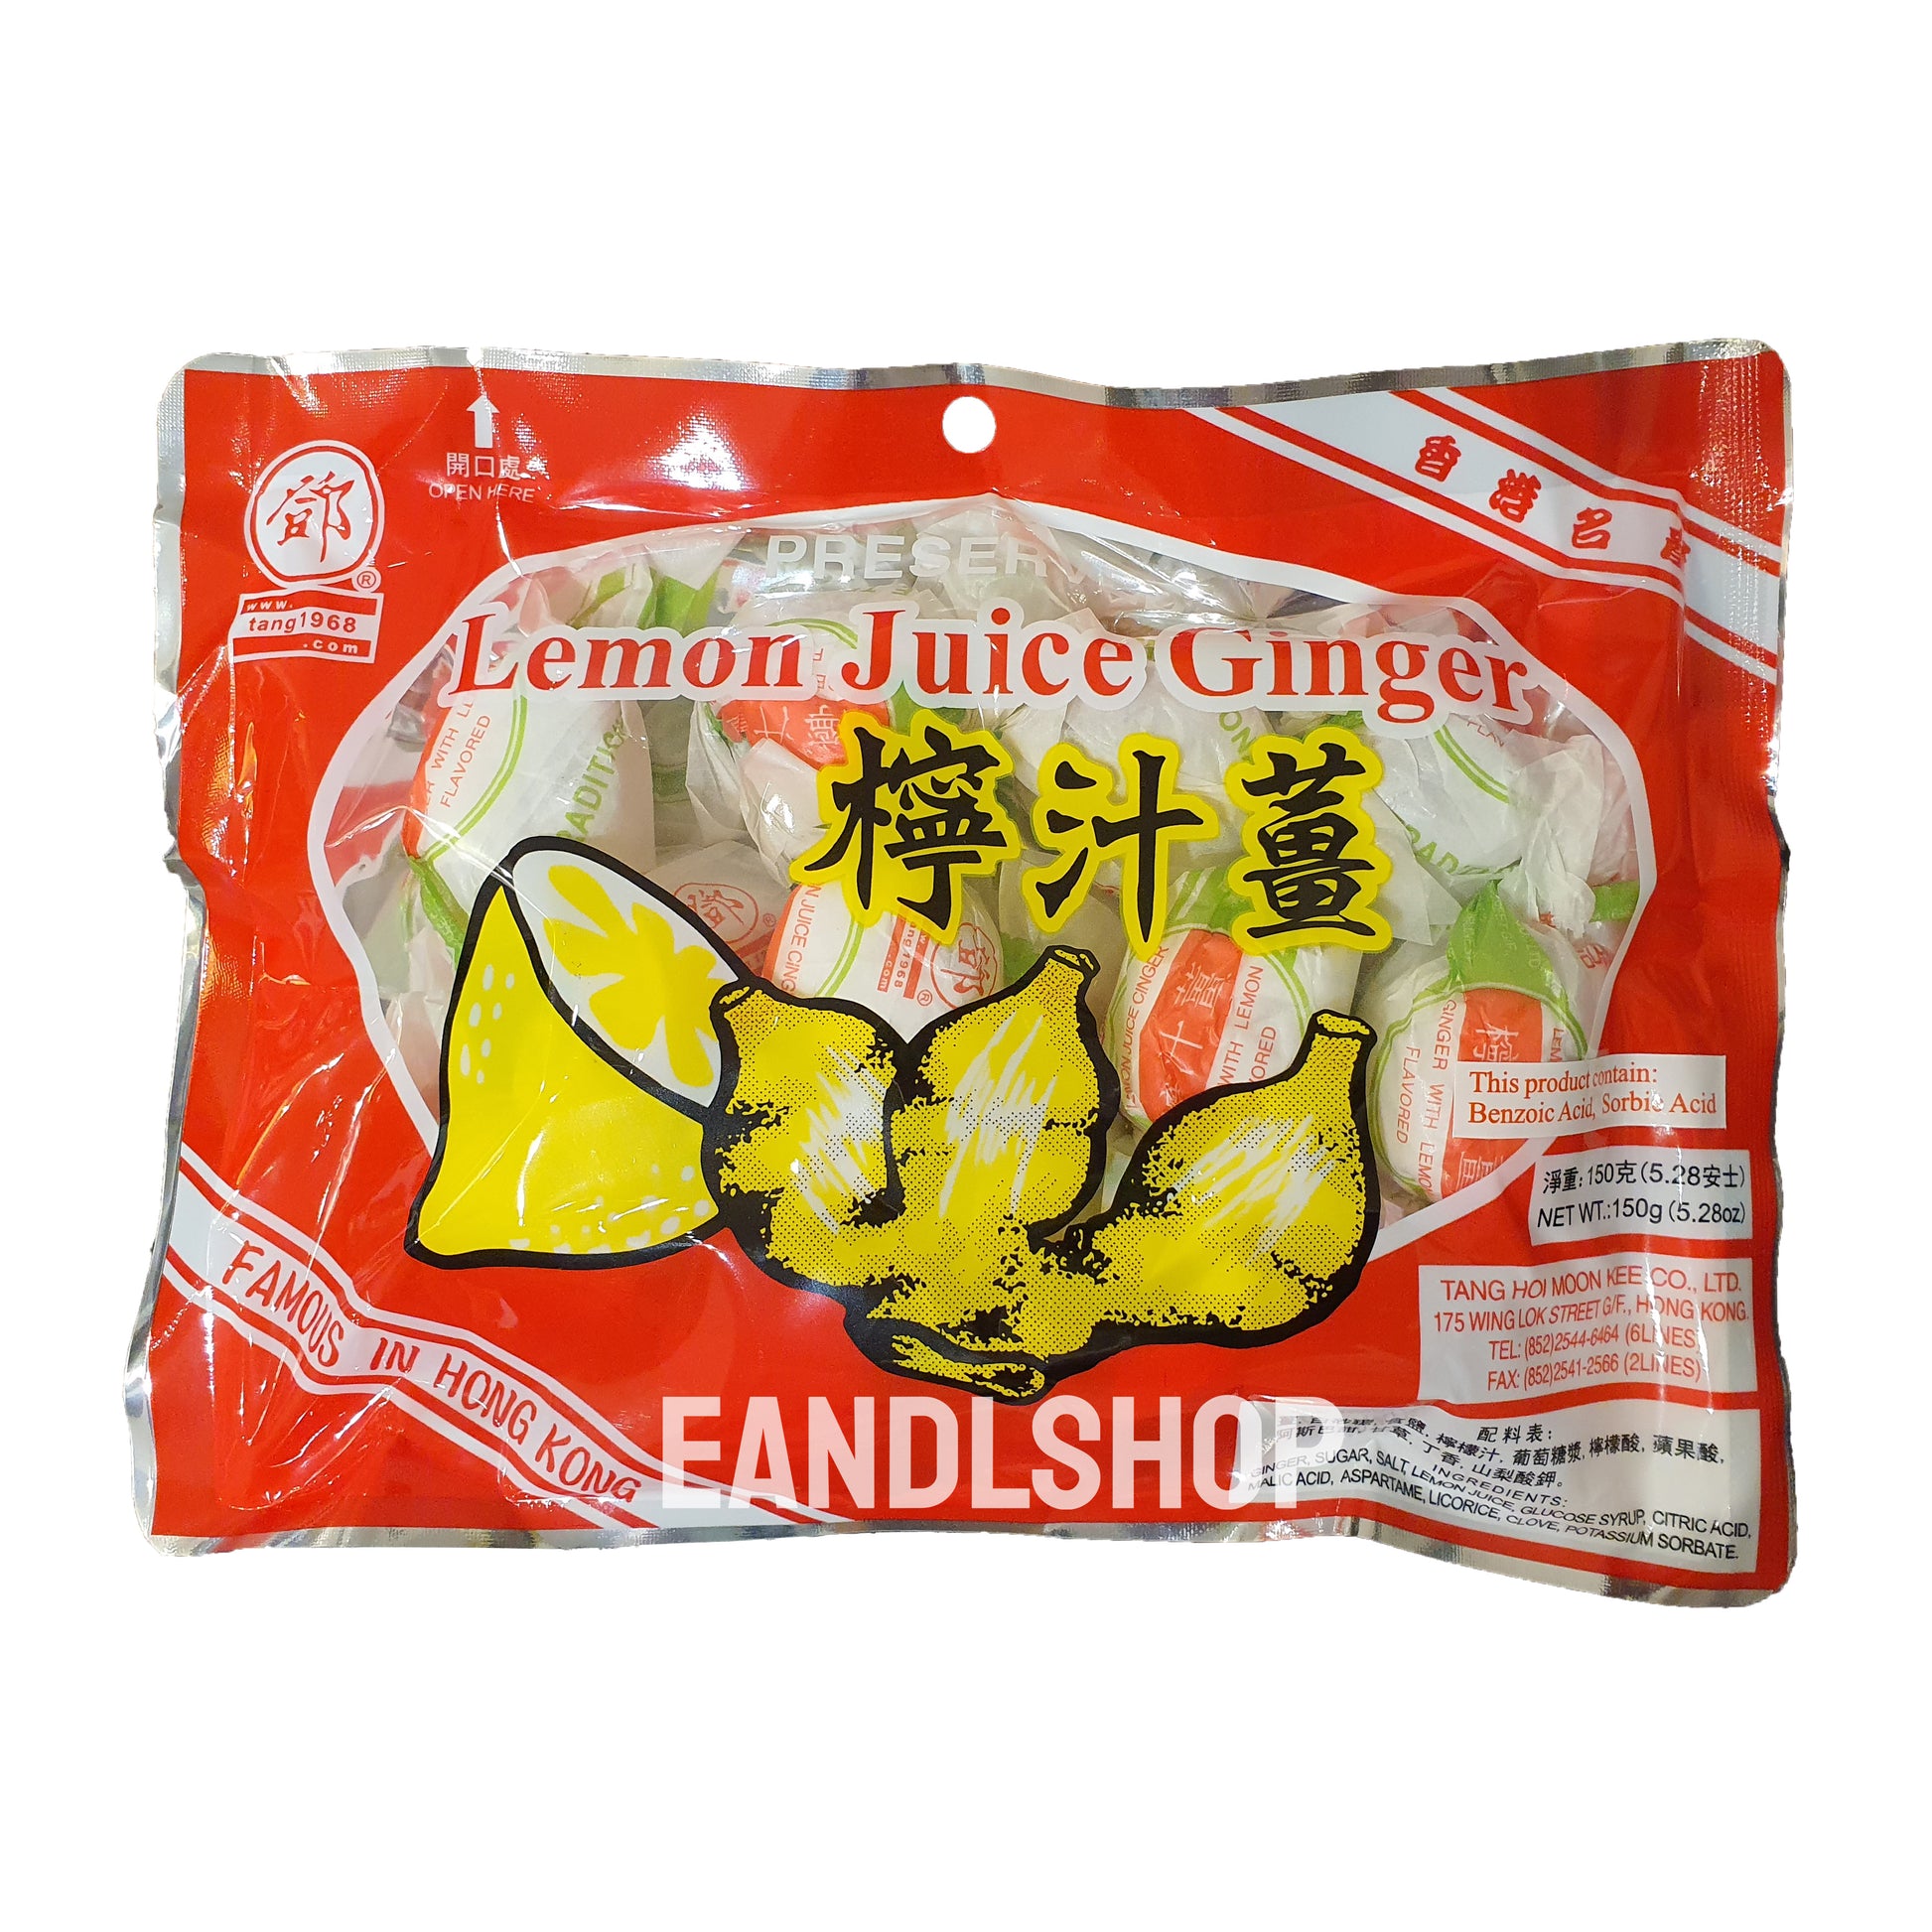 Preserved Lemon Juice Ginger Chinese Traditional Food. Famous in Hong Kong. Old-school biscuits, modern snacks (chips, crackers), cakes, gummies, plums, dried fruits, nuts, herbal tea – available at www.EANDLSHOP.com